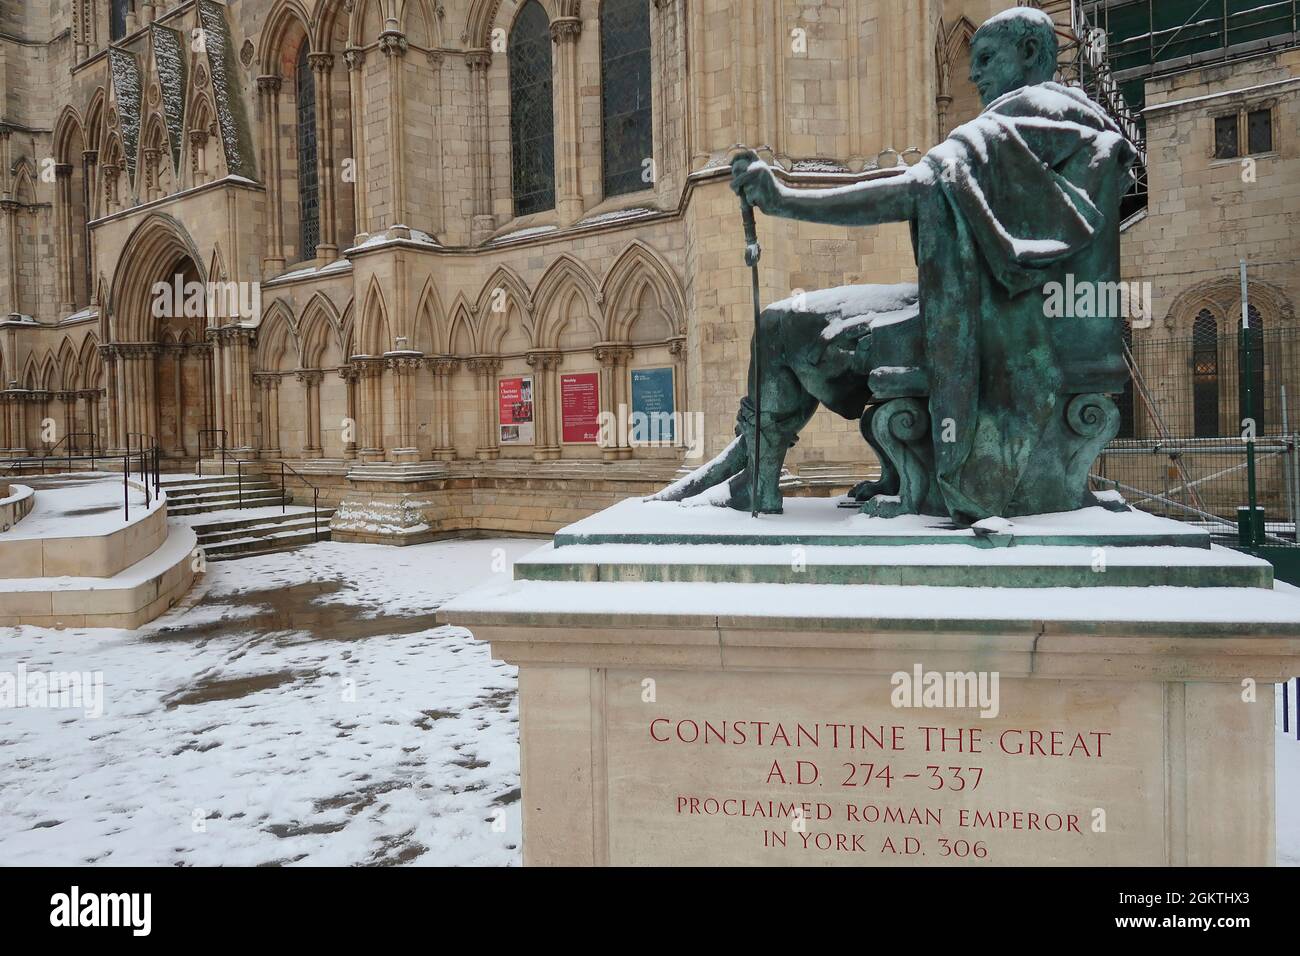 Statue of Constantine the Great at York Minster covered in snow, York, UK Stock Photo